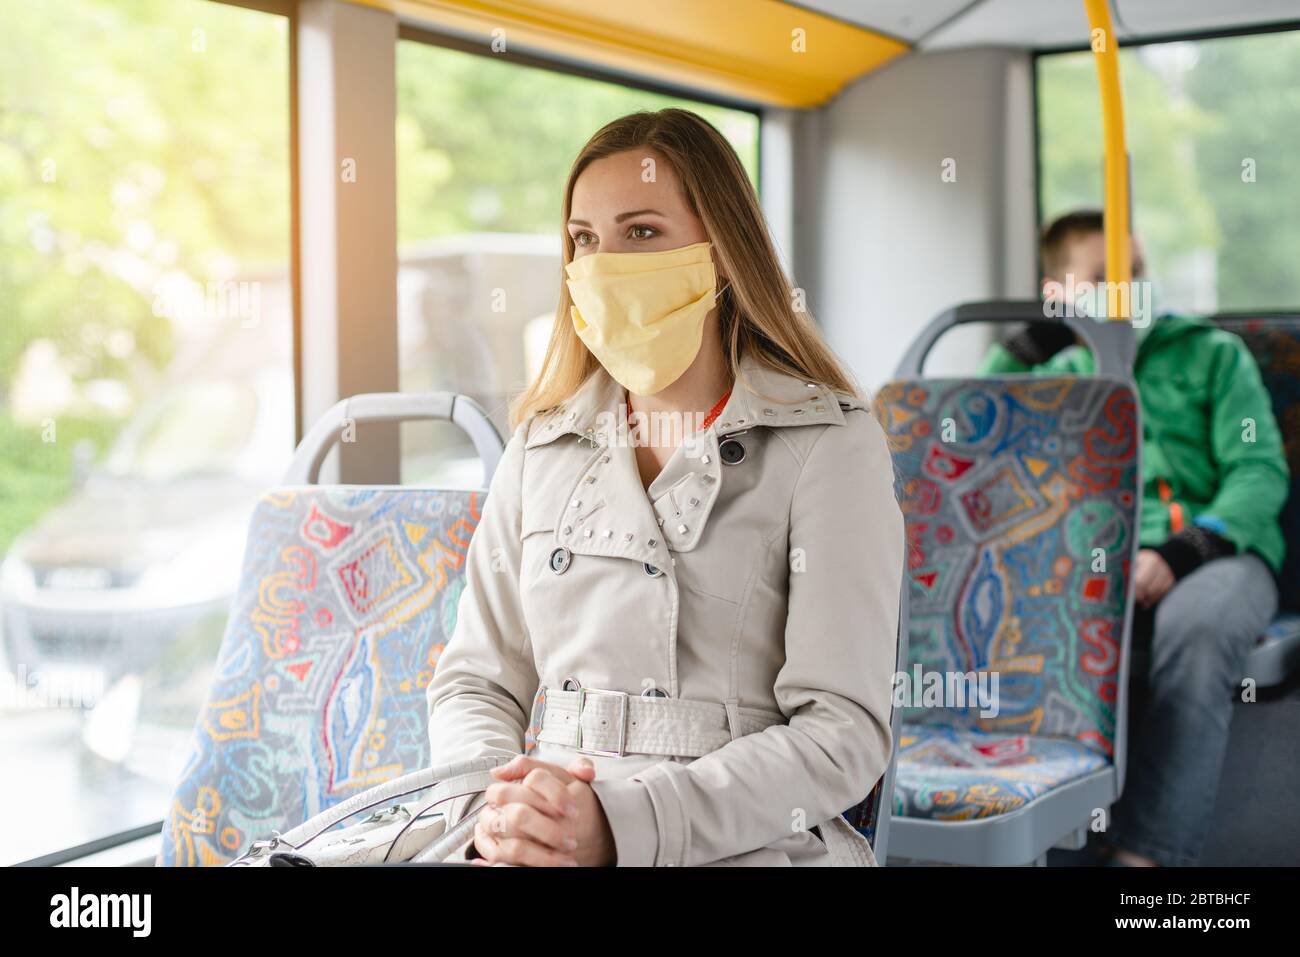 Woman using public transport during covid-19 crisis Stock Photo